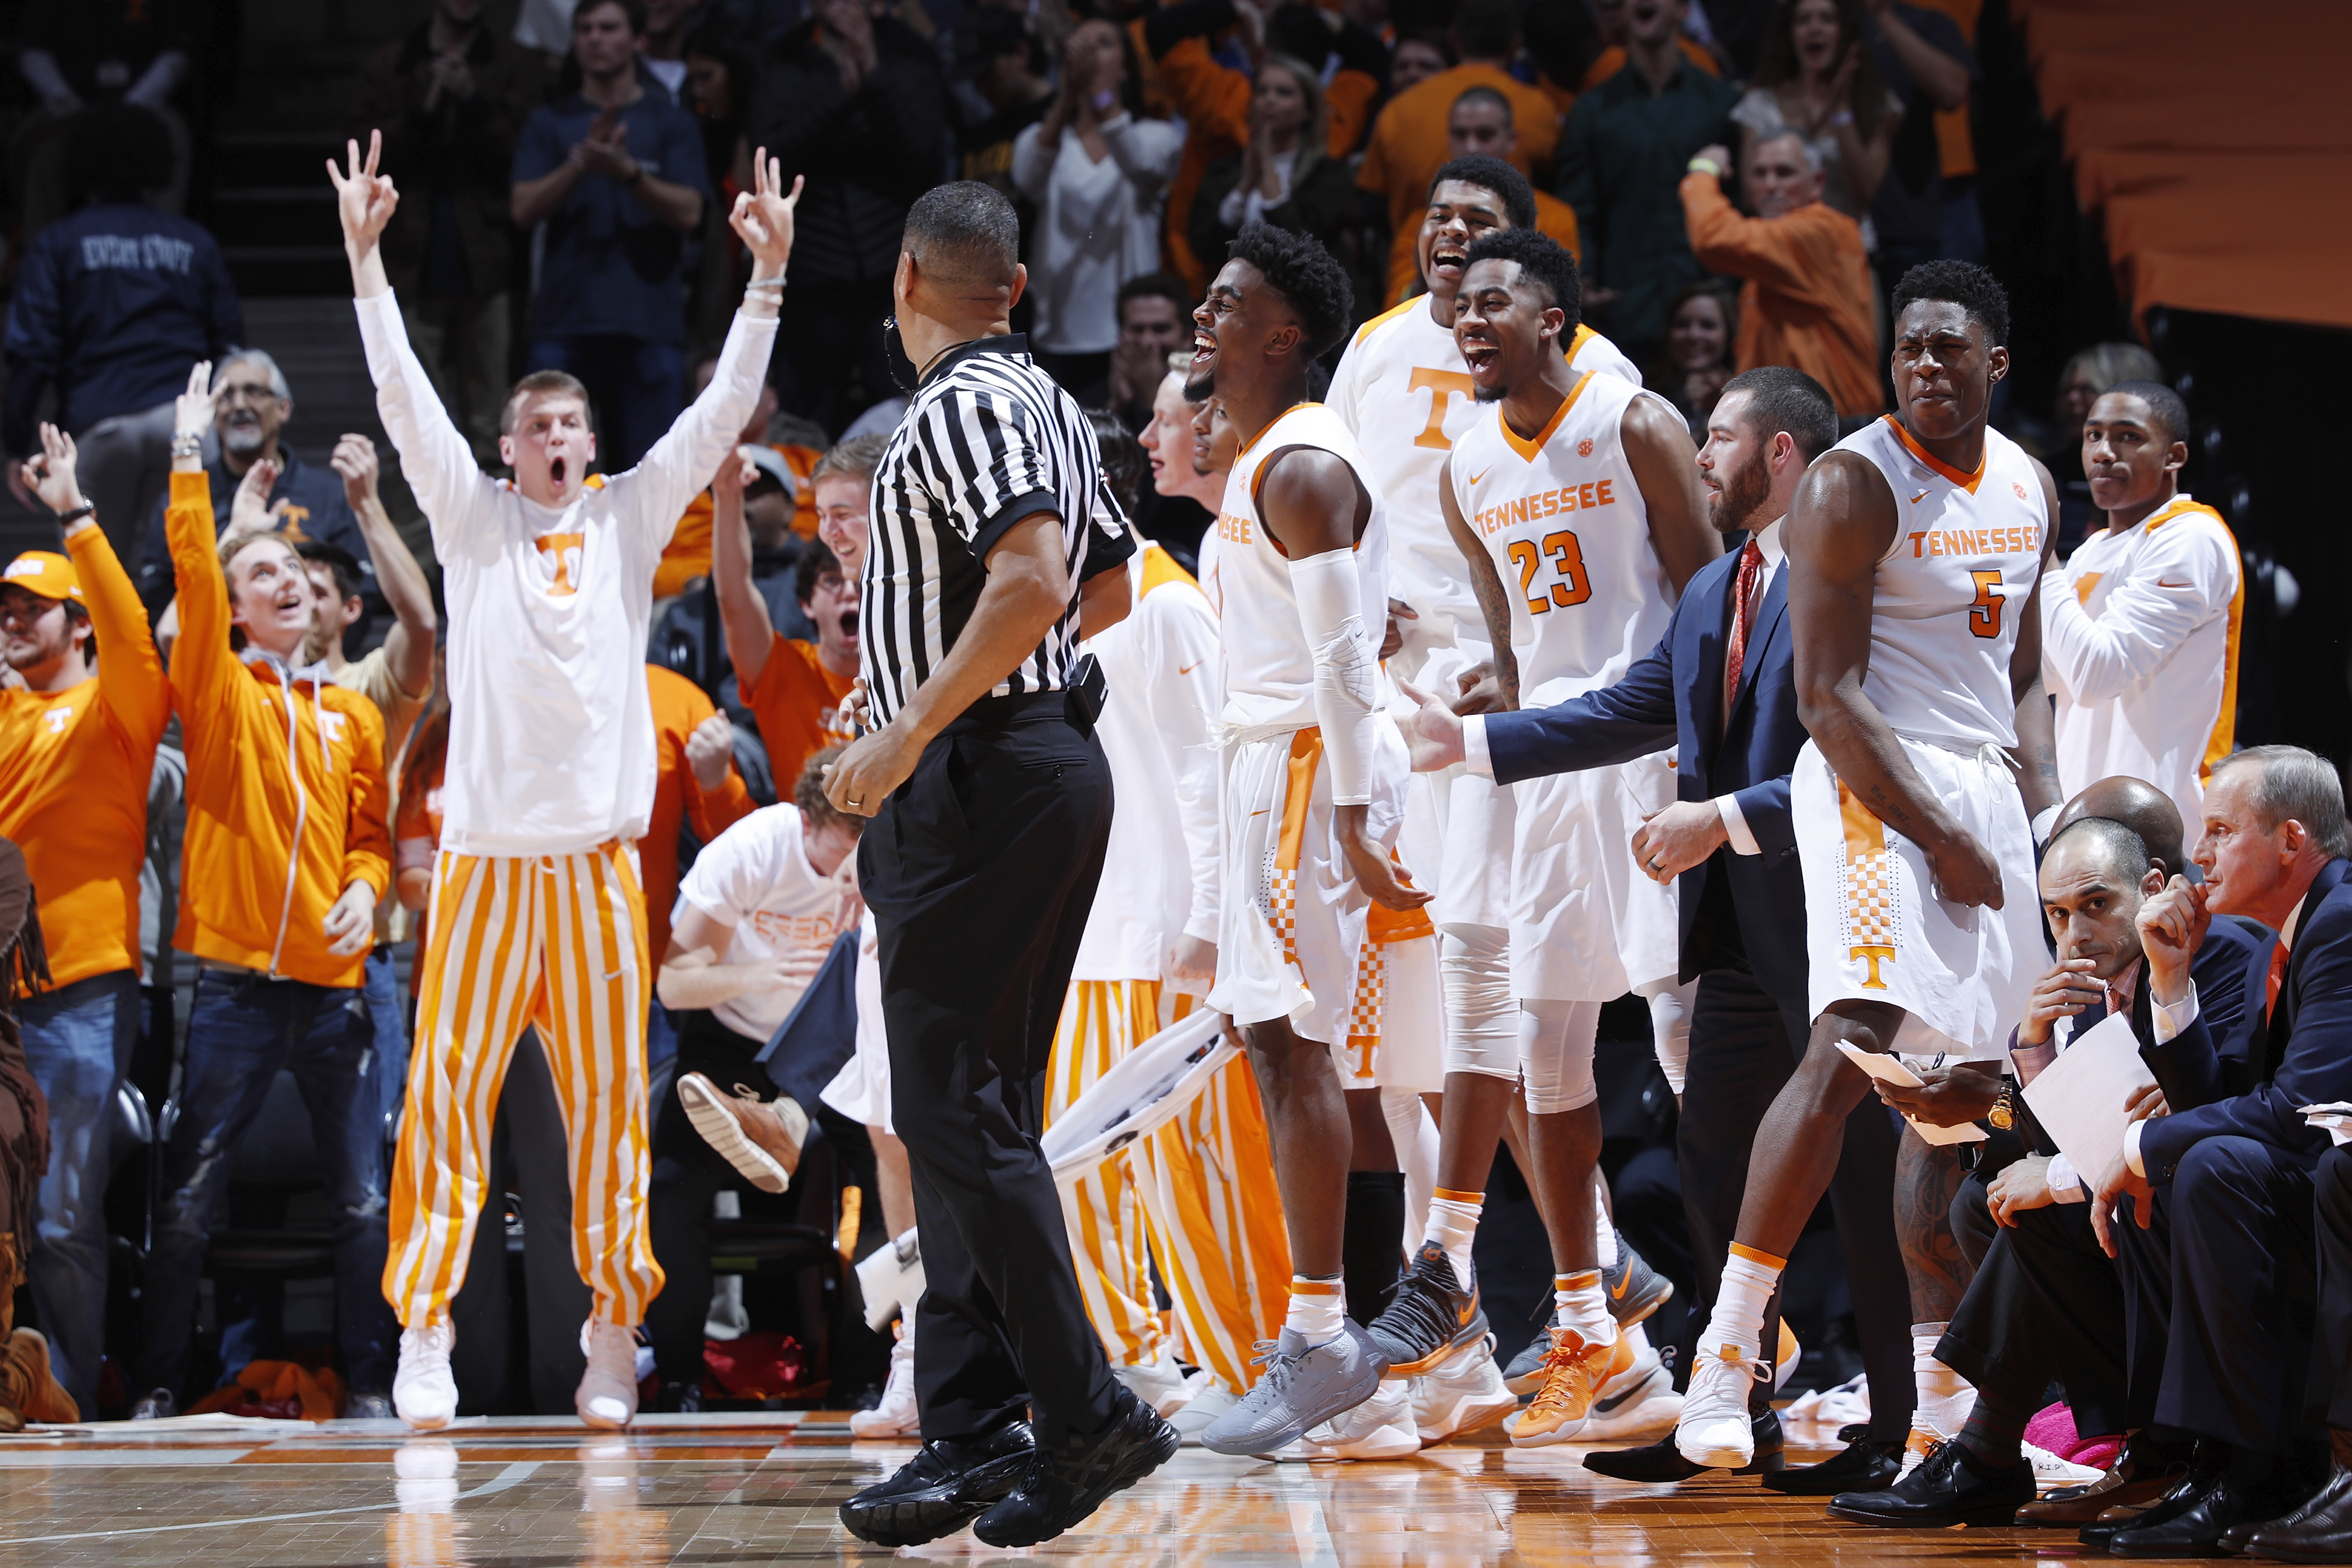 Tennessee basketball at Ole Miss Live stream, game time, prediction